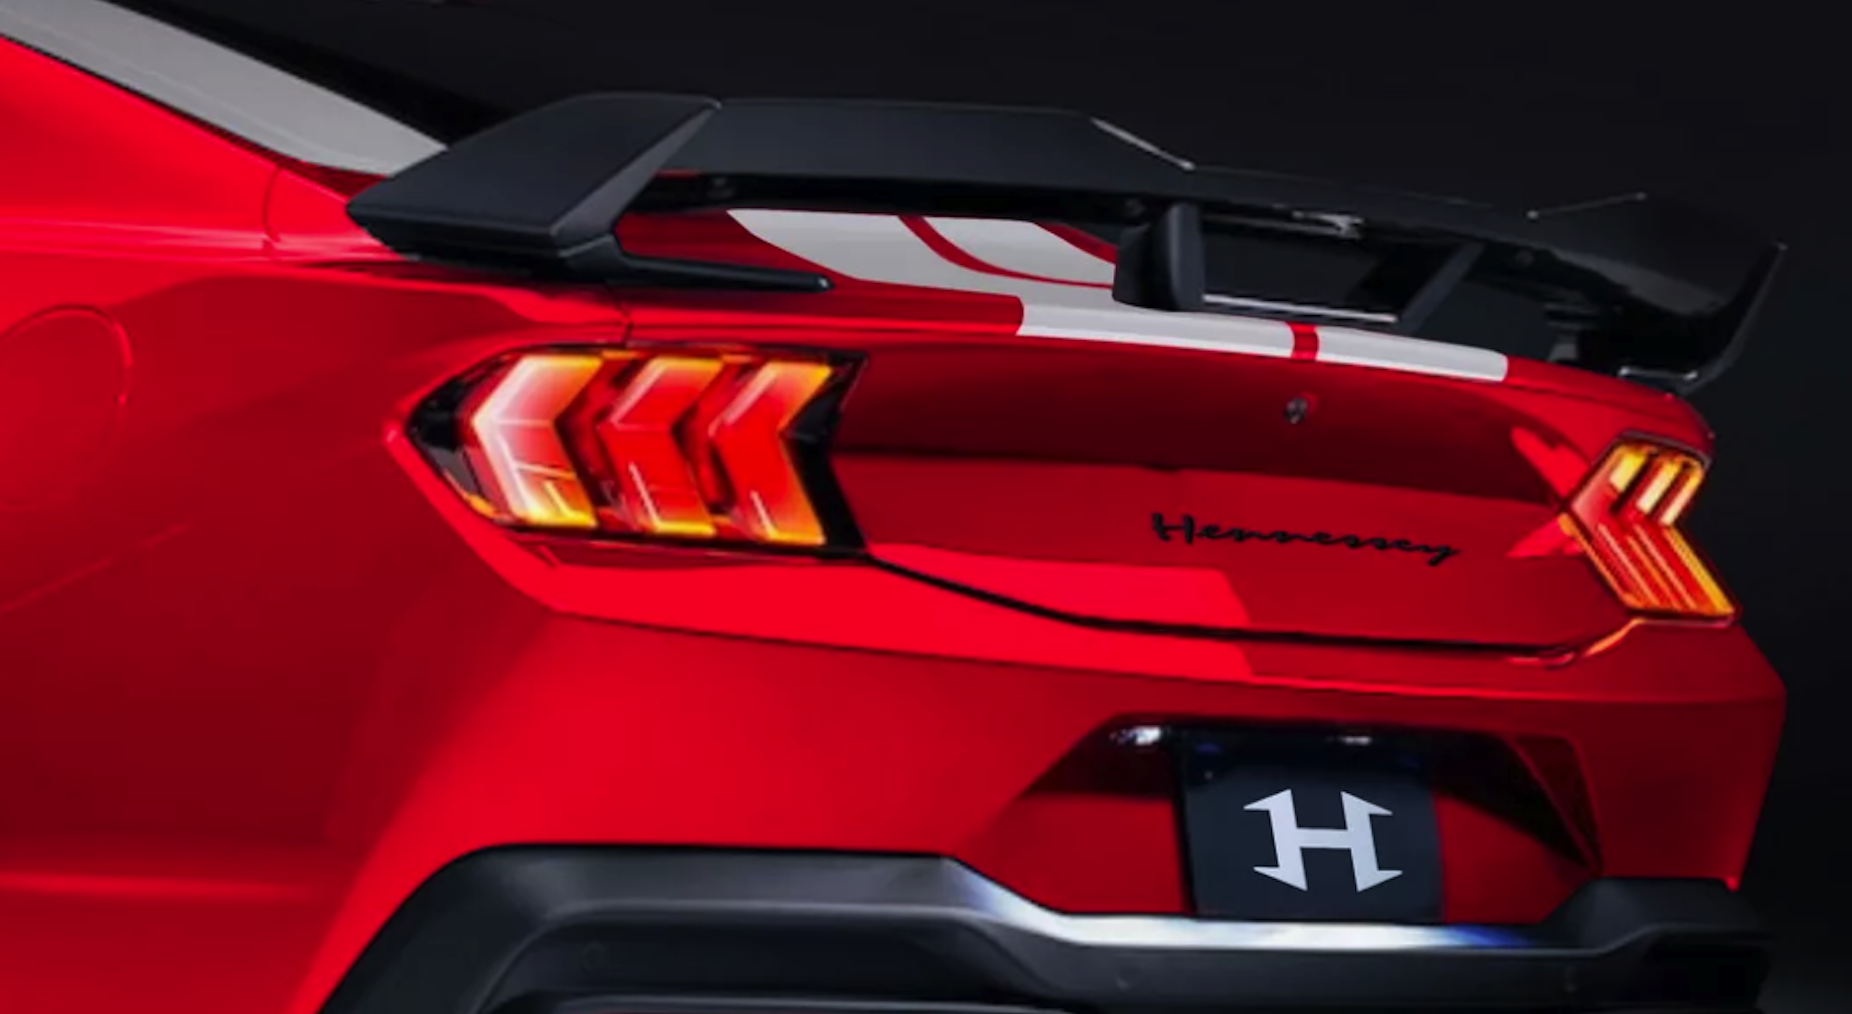 hennessey turns the mustang dark horse into a 850hp beast